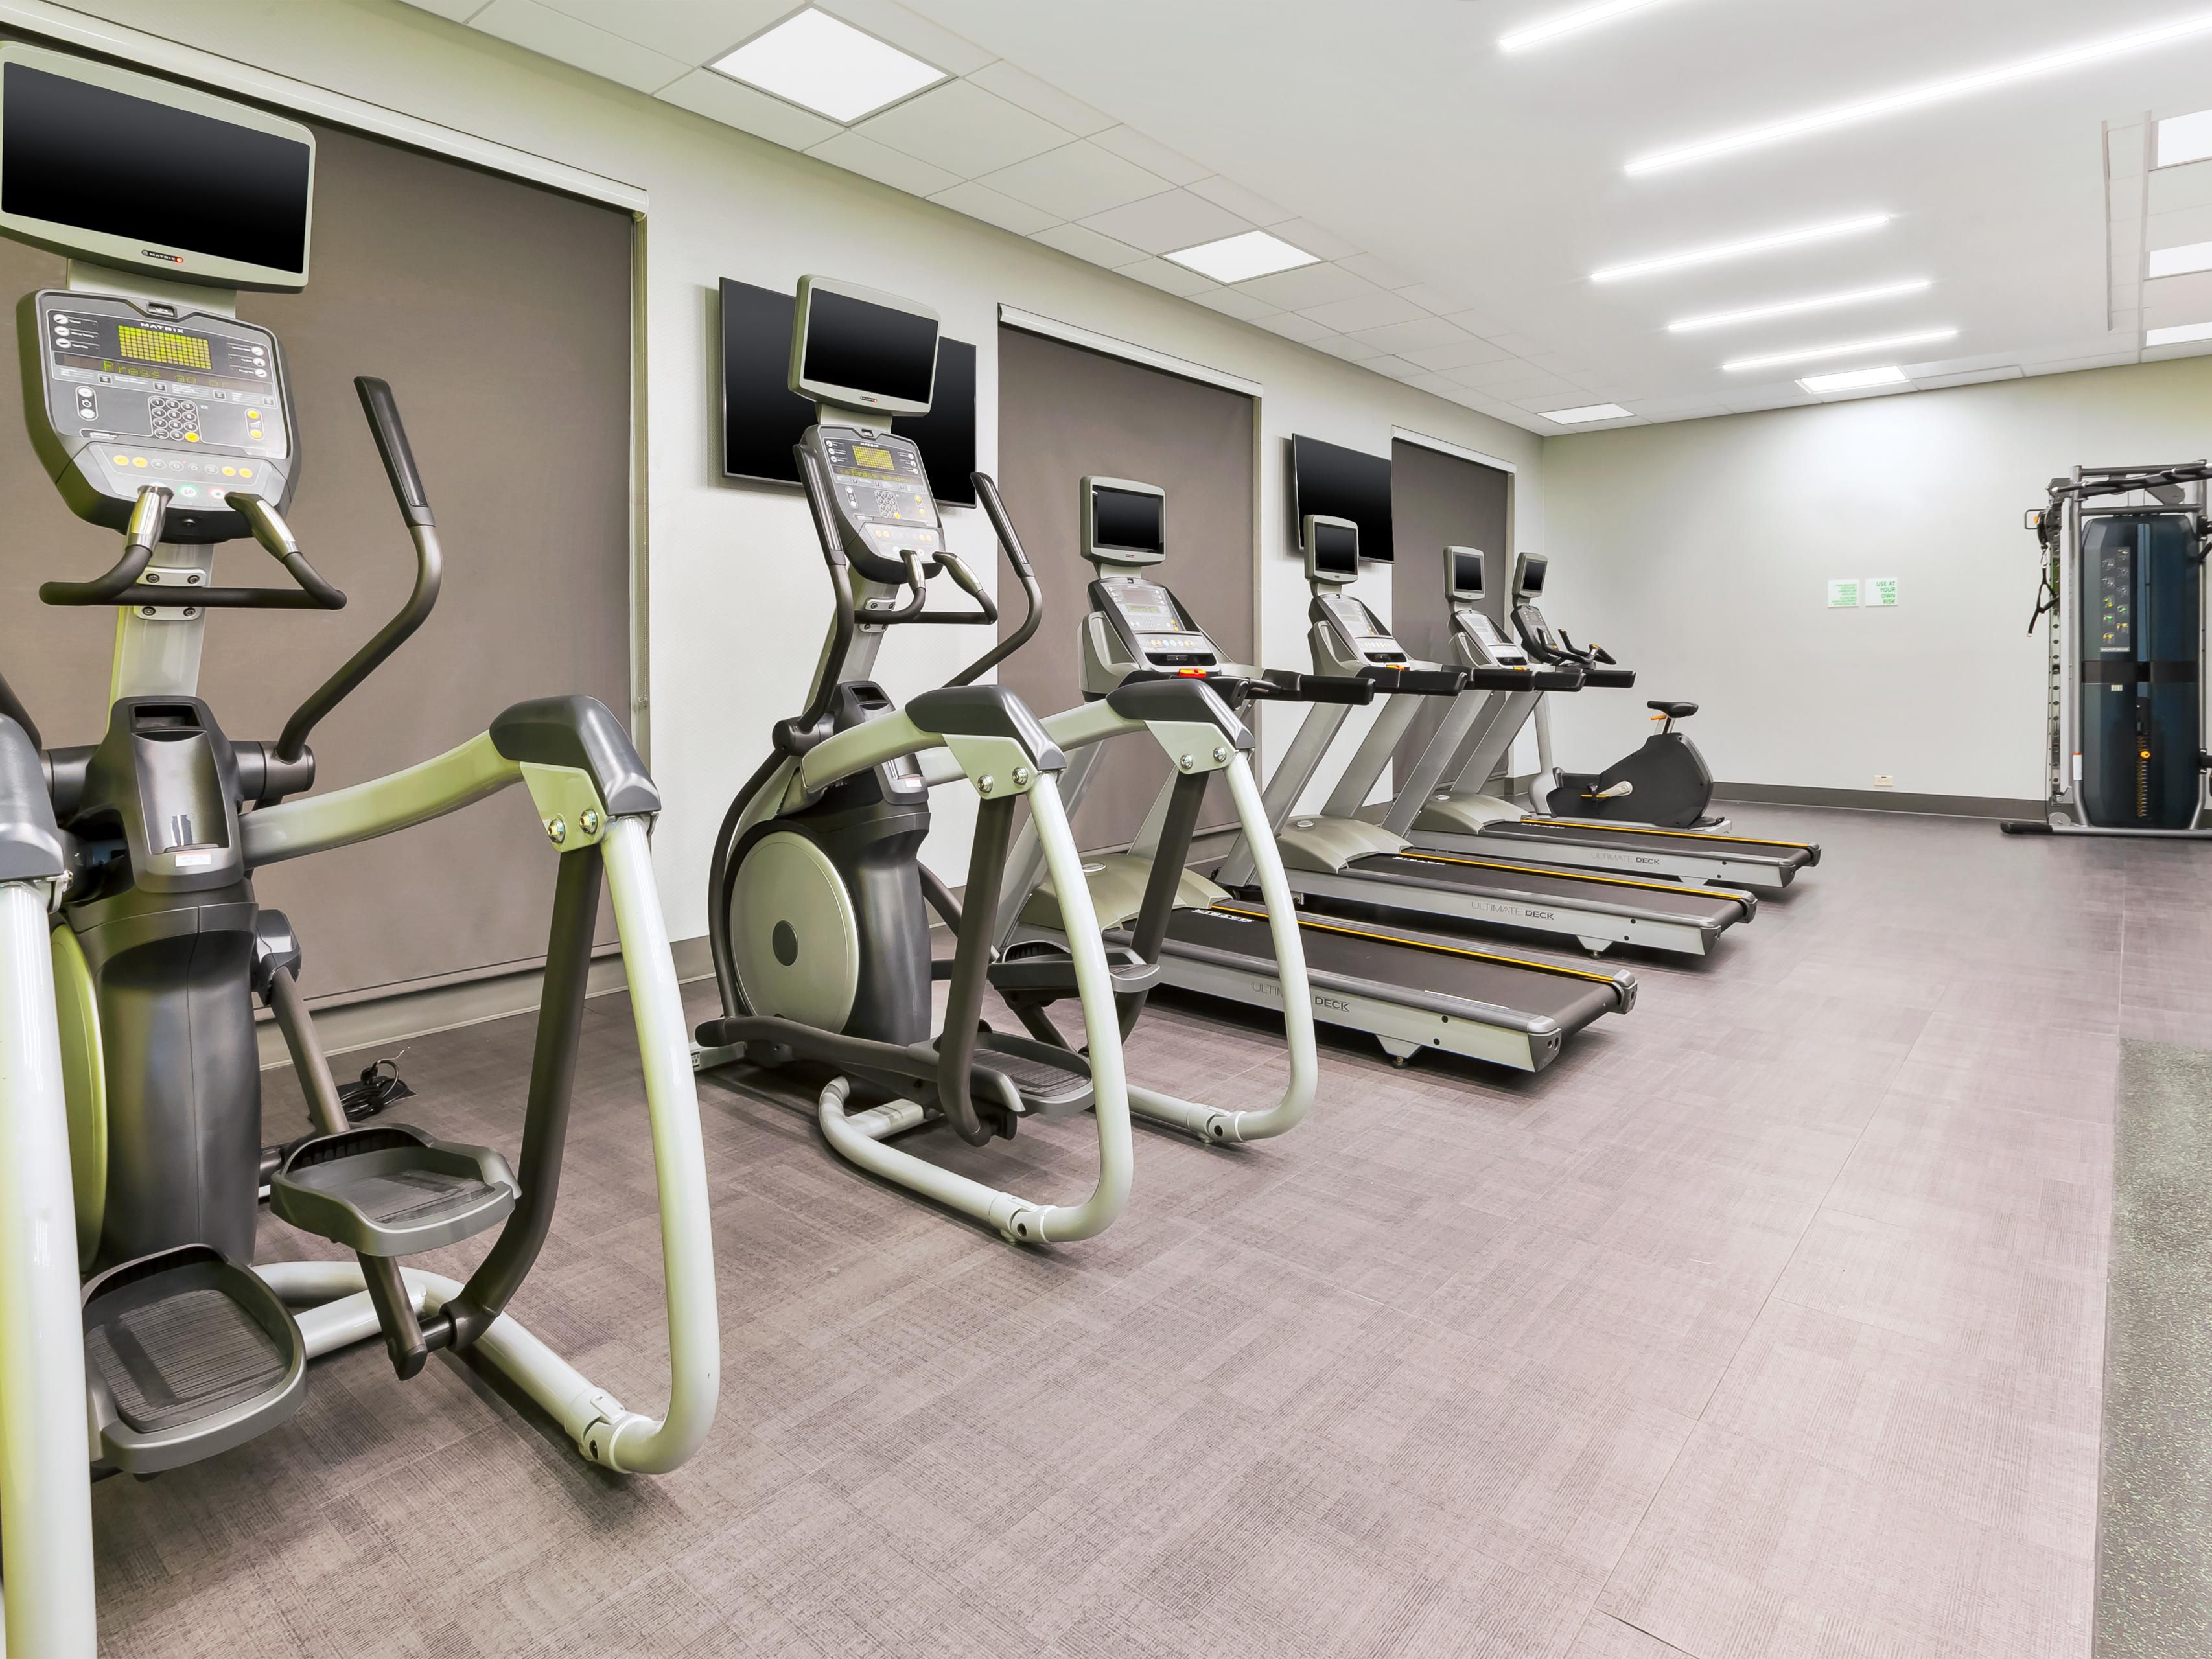 Every guest can enjoy our complimentary 24-hour fitness center while staying with us! Our fitness center features the newest equipment, built-in screens, and complimentary earbuds upon request. 